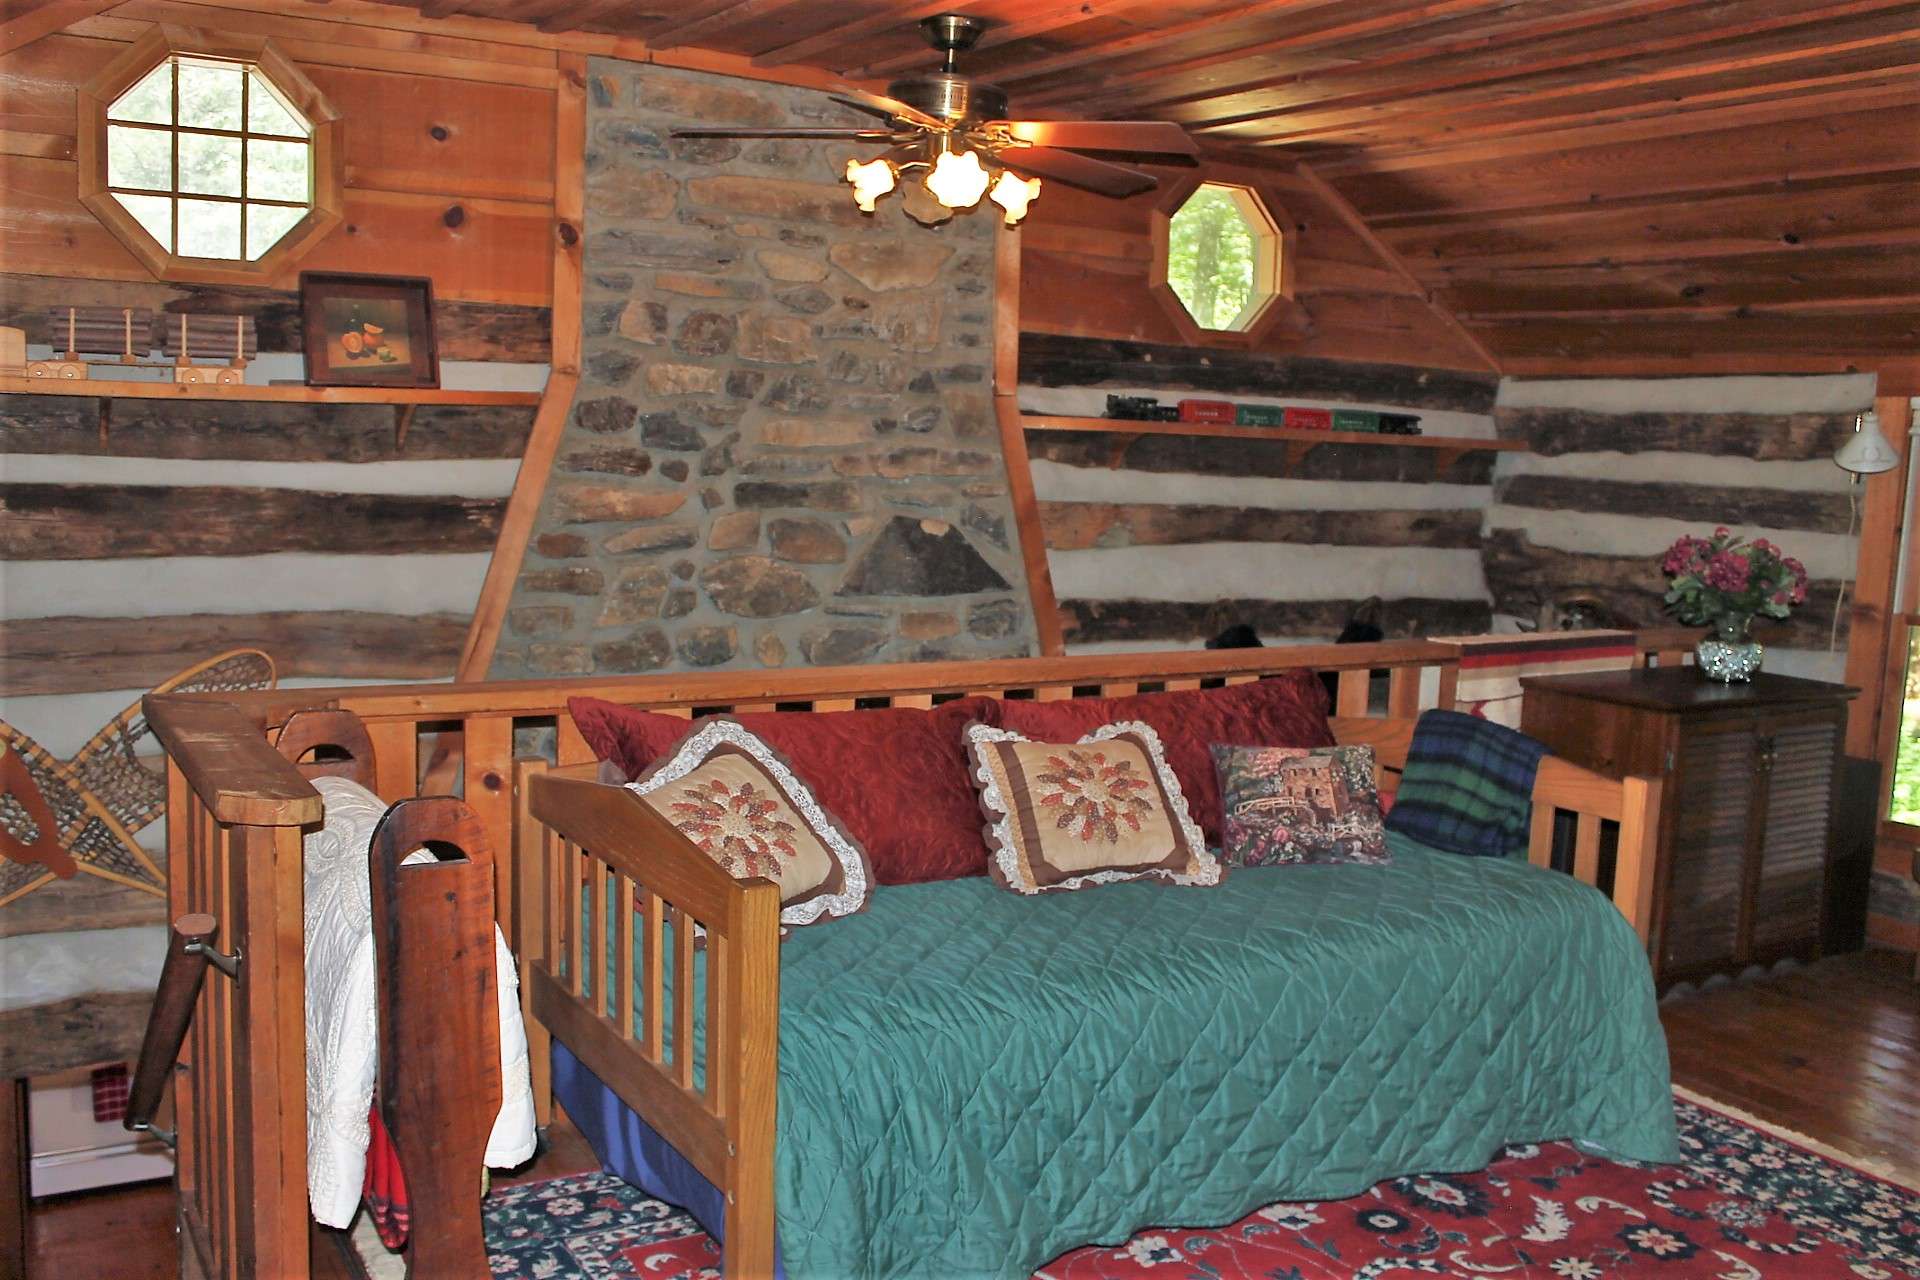 The stone fireplace is visible from the upstairs open loft which is set up as an additional sleeping area